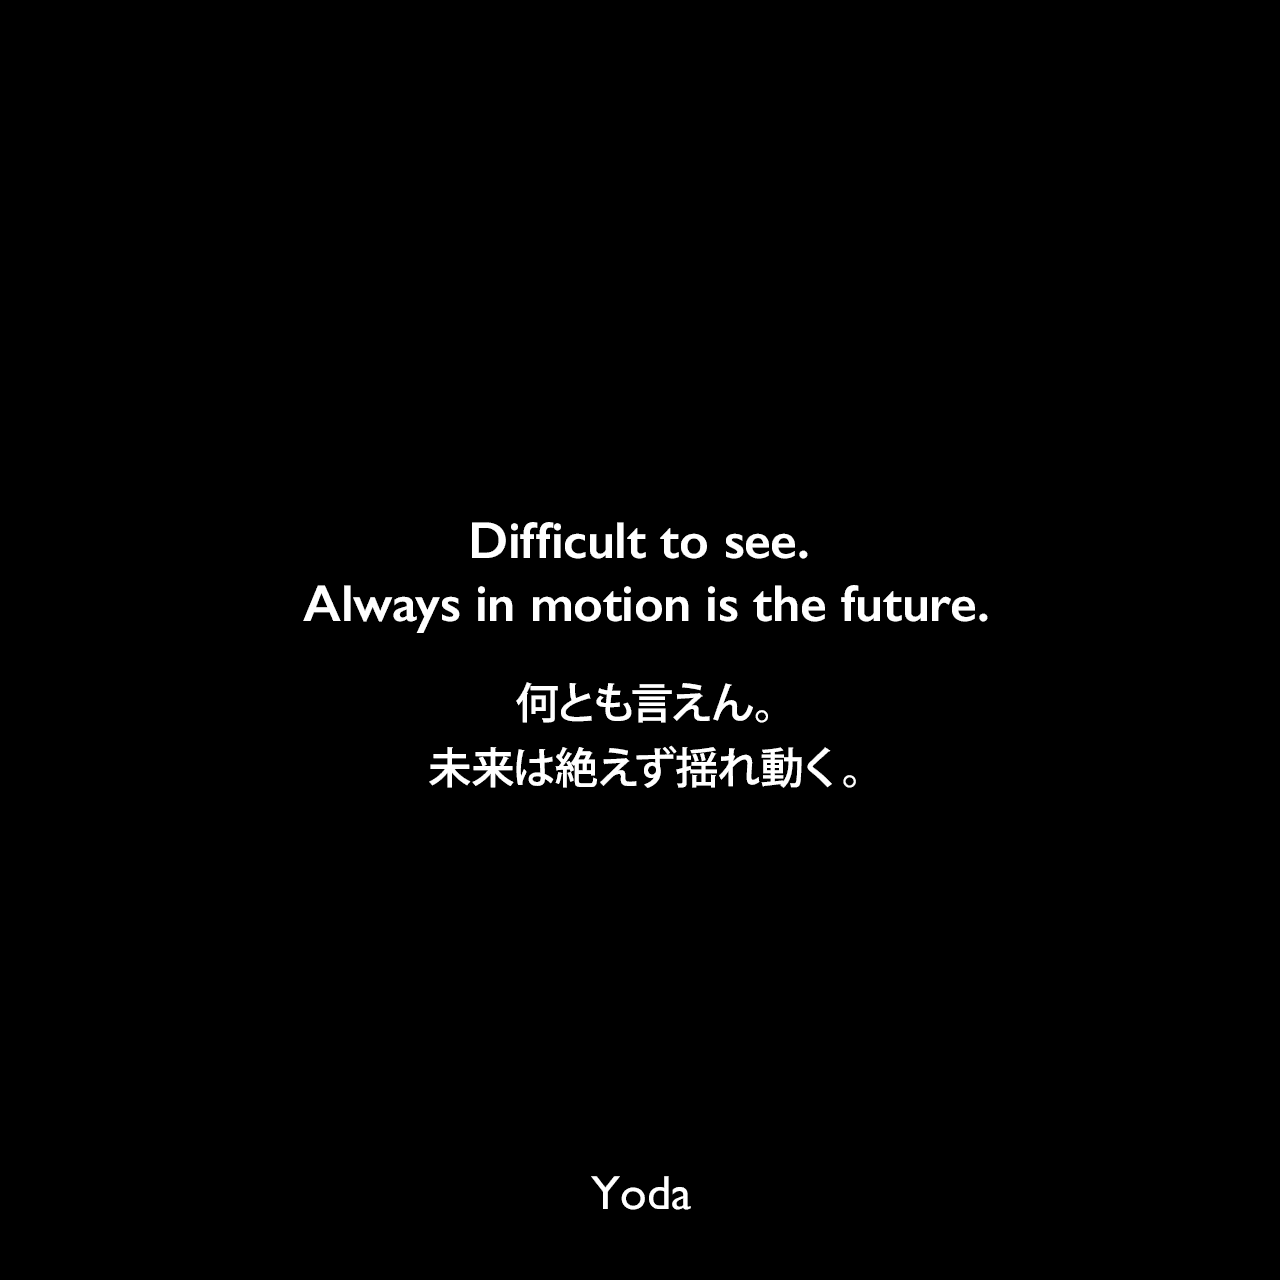 Difficult to see. Always in motion is the future.何とも言えん。未来は絶えず揺れ動く。- スター・ウォーズ エピソード5/帝国の逆襲Yoda